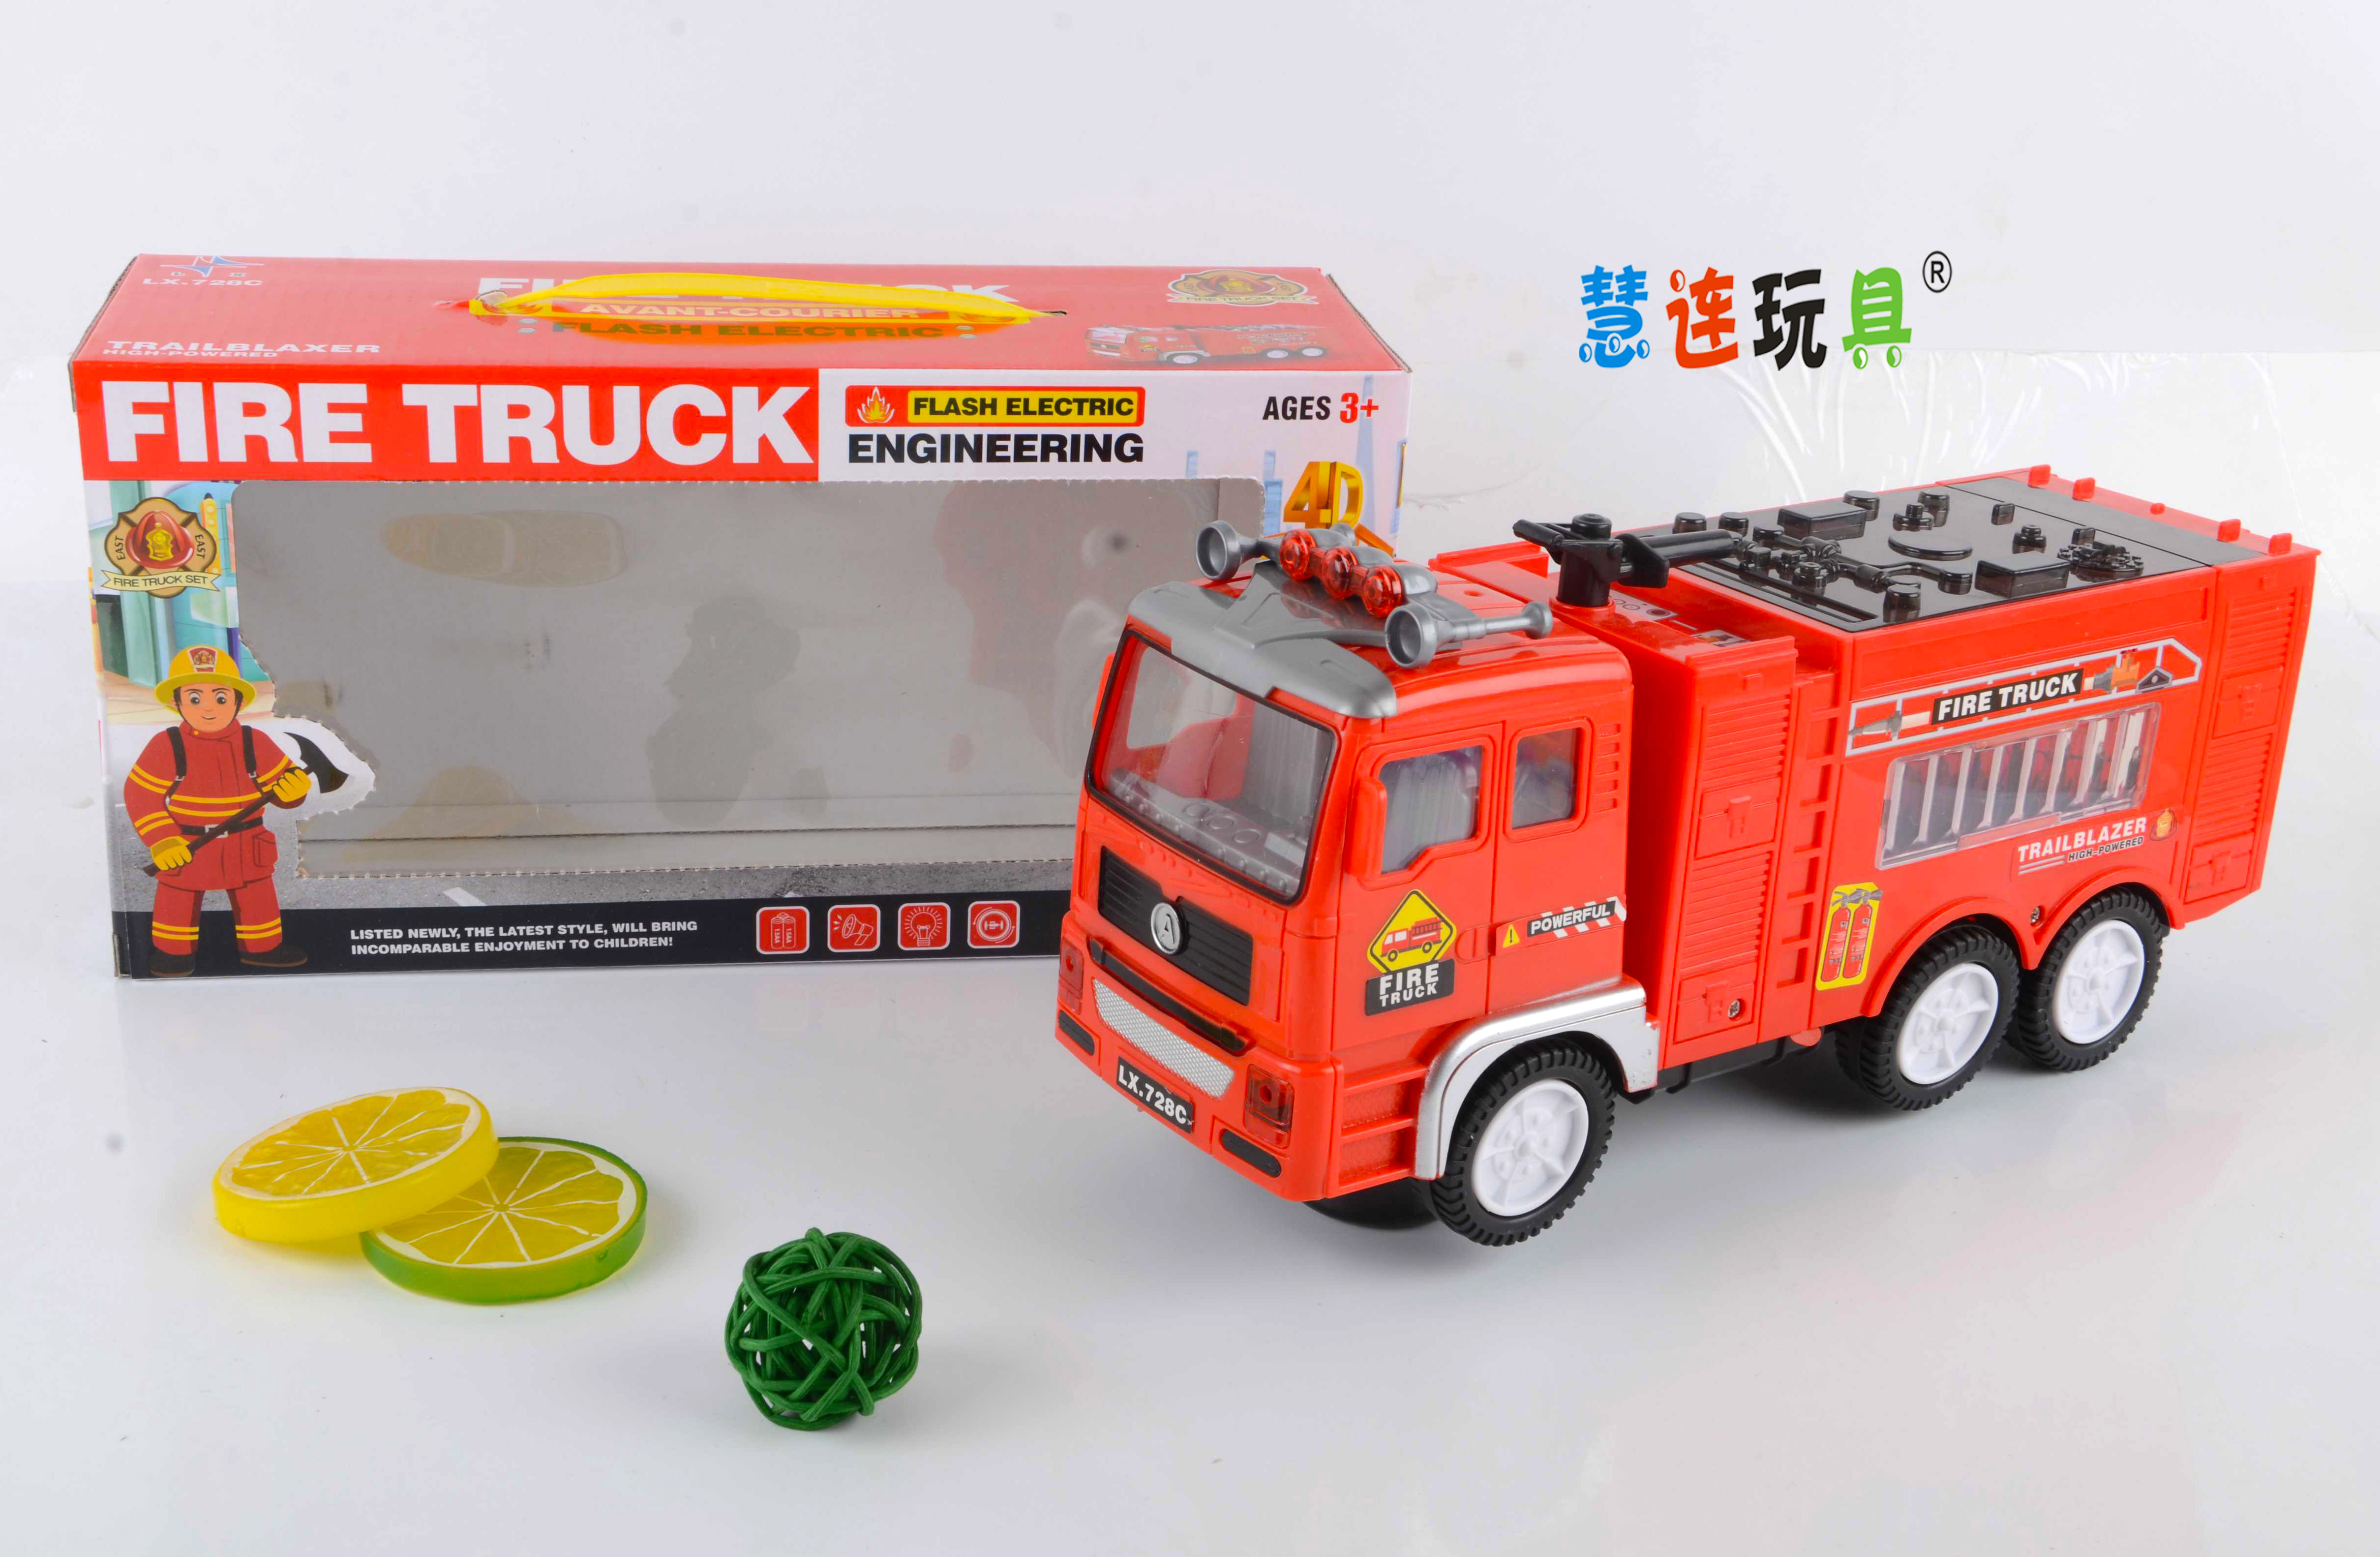 rescue vehicle toys